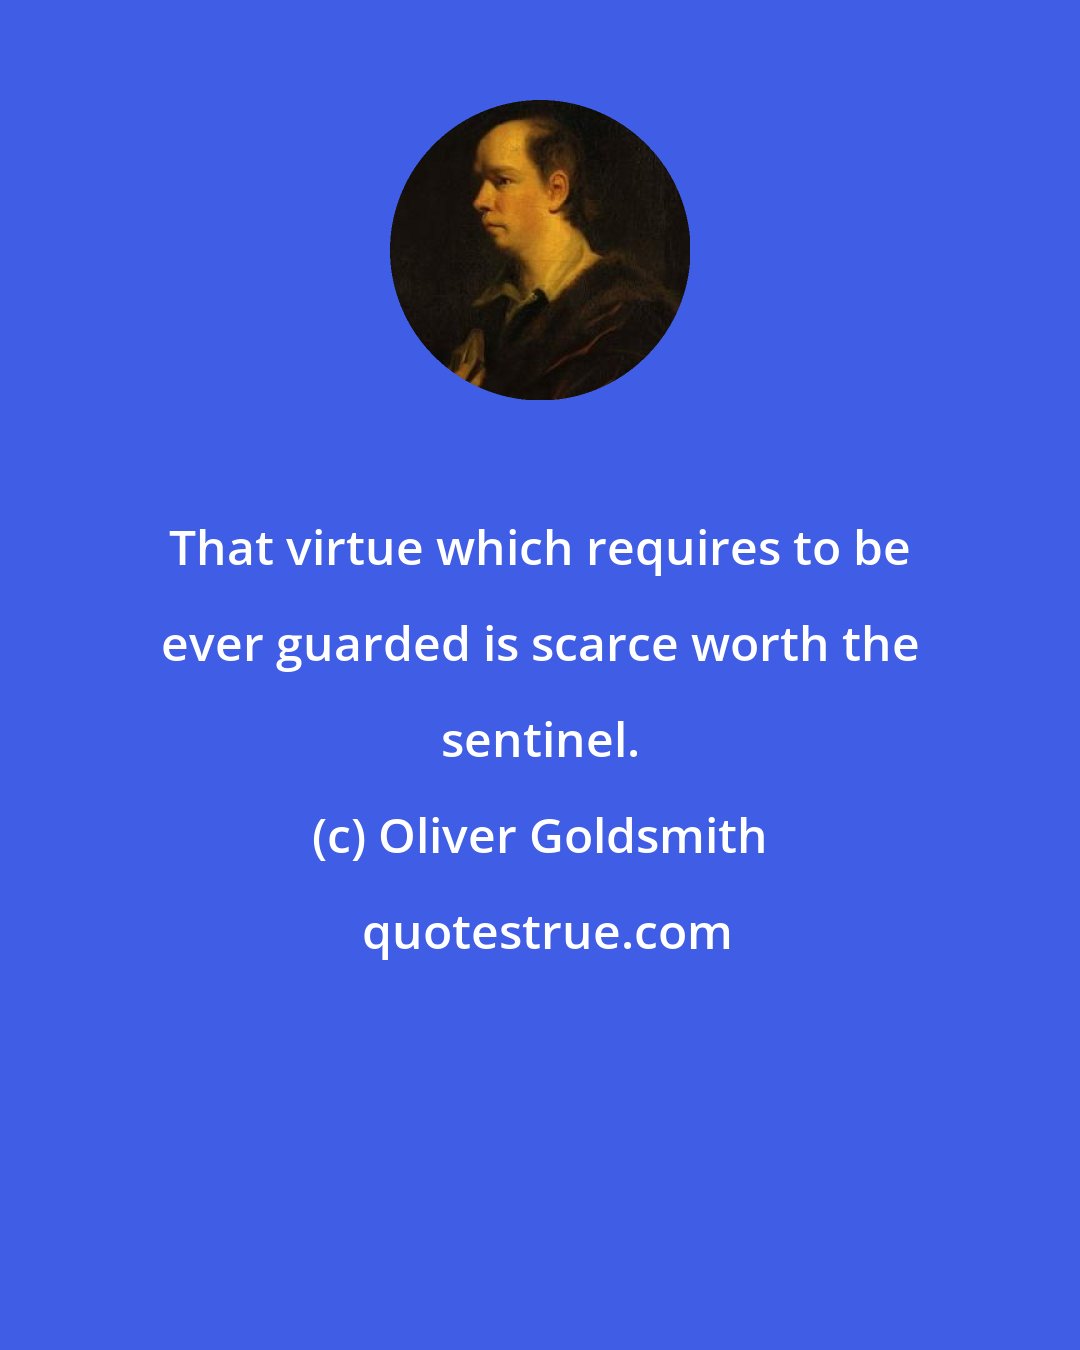 Oliver Goldsmith: That virtue which requires to be ever guarded is scarce worth the sentinel.